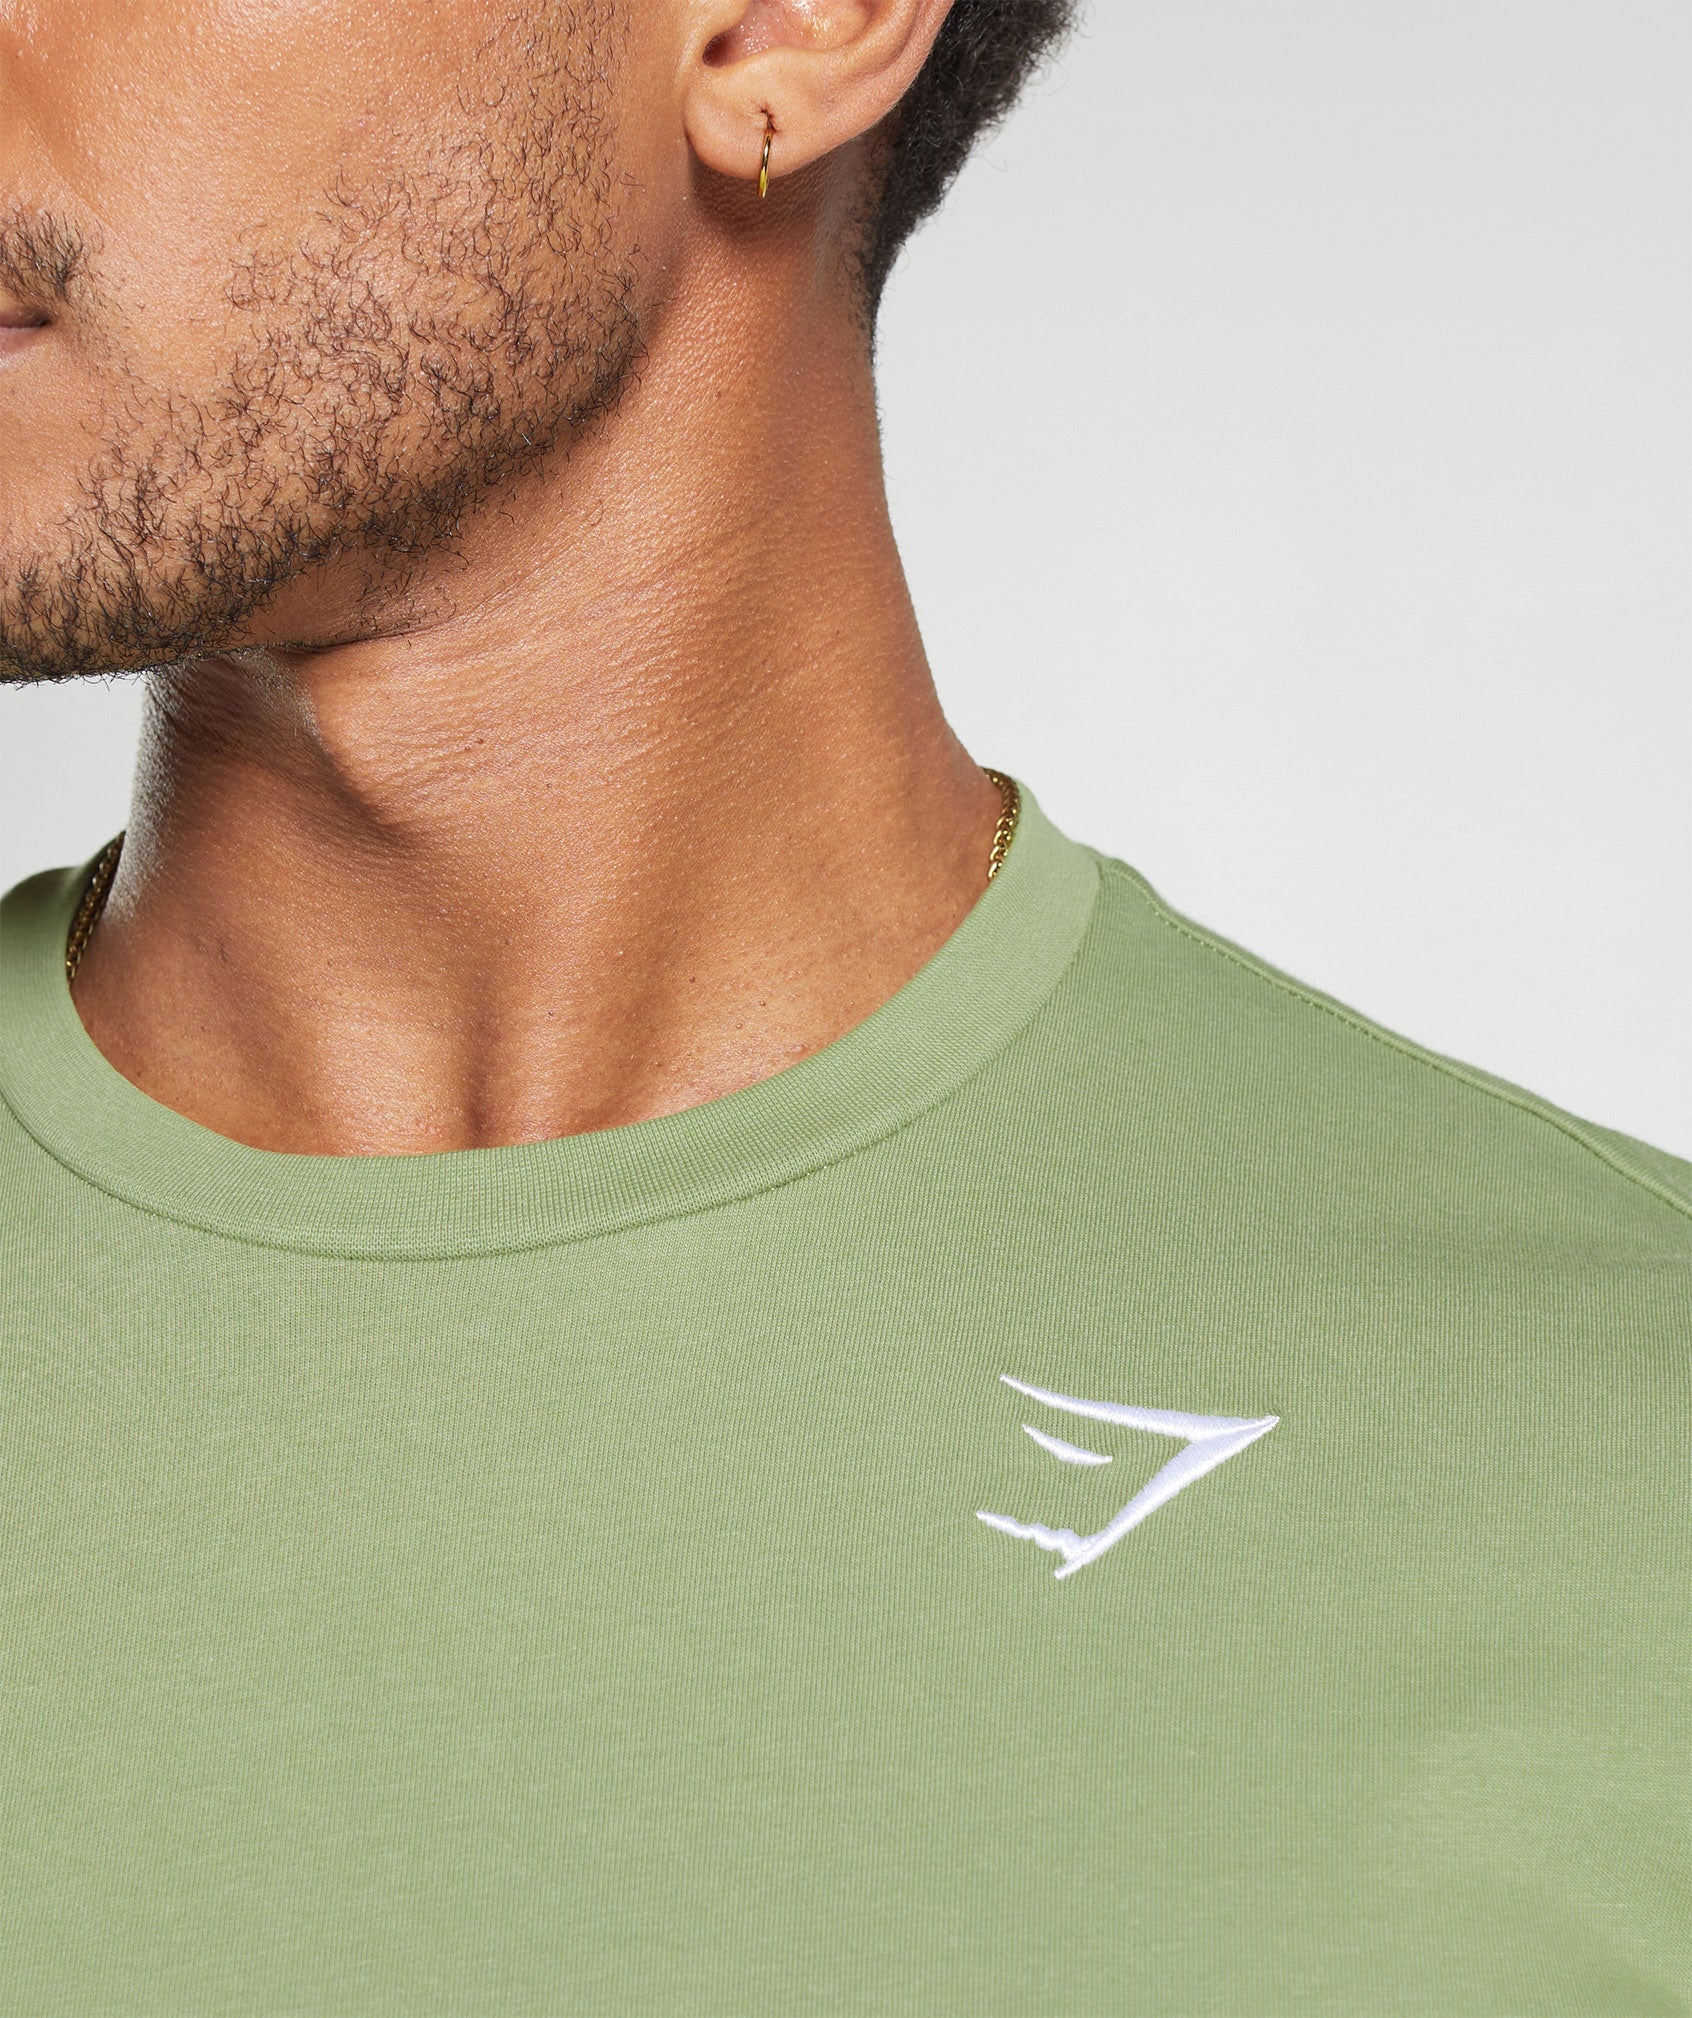 Crest T-Shirt in Natural Sage Green - view 5